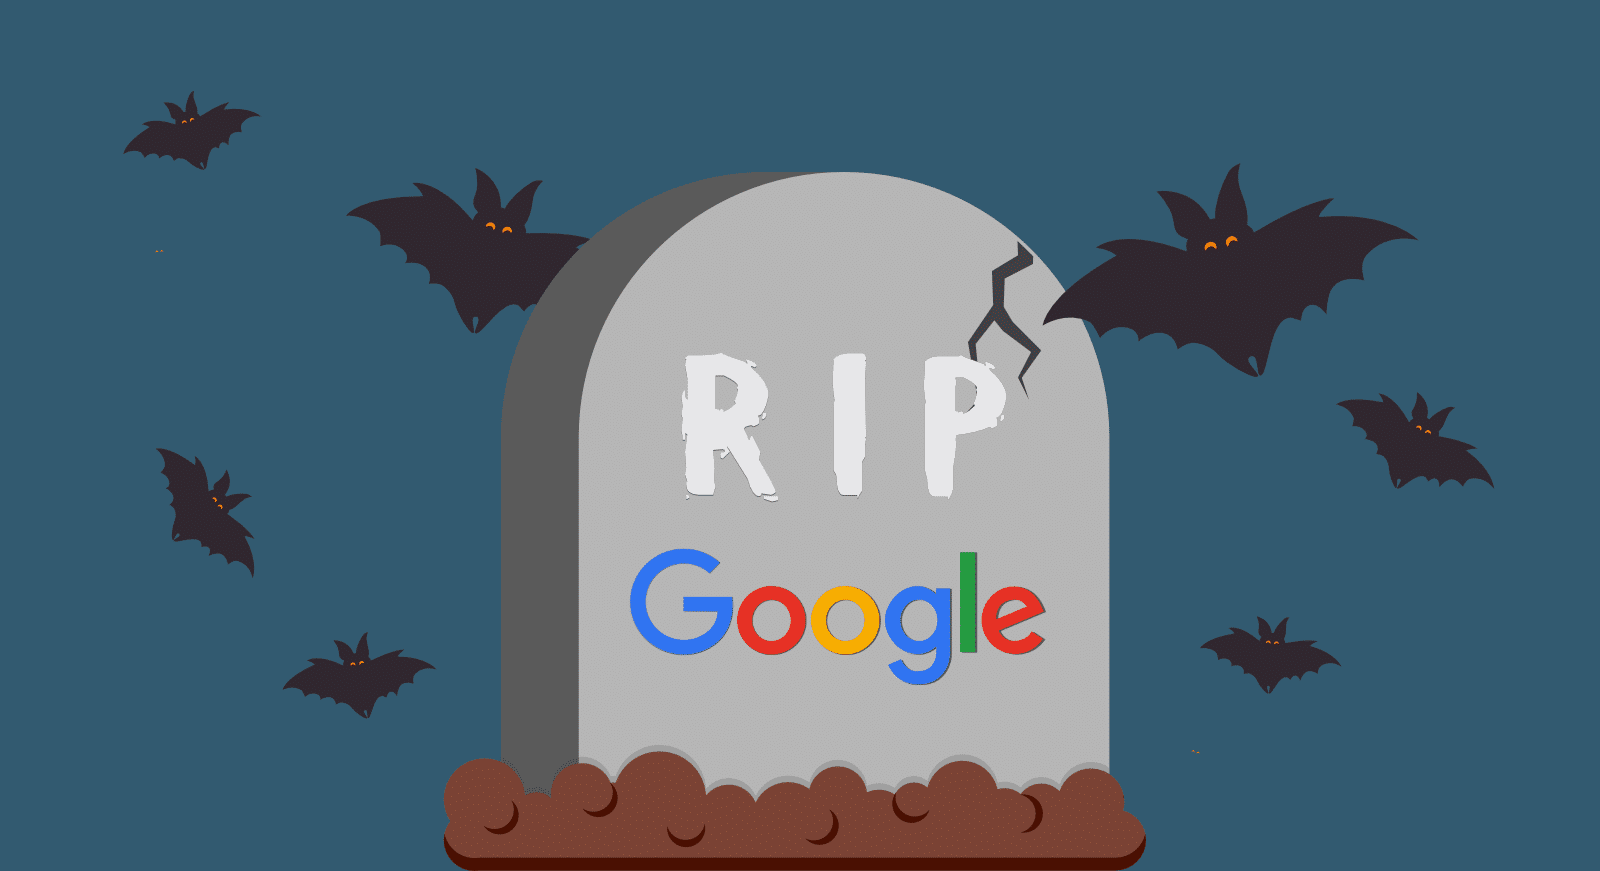 Gravestone with Google written on the front